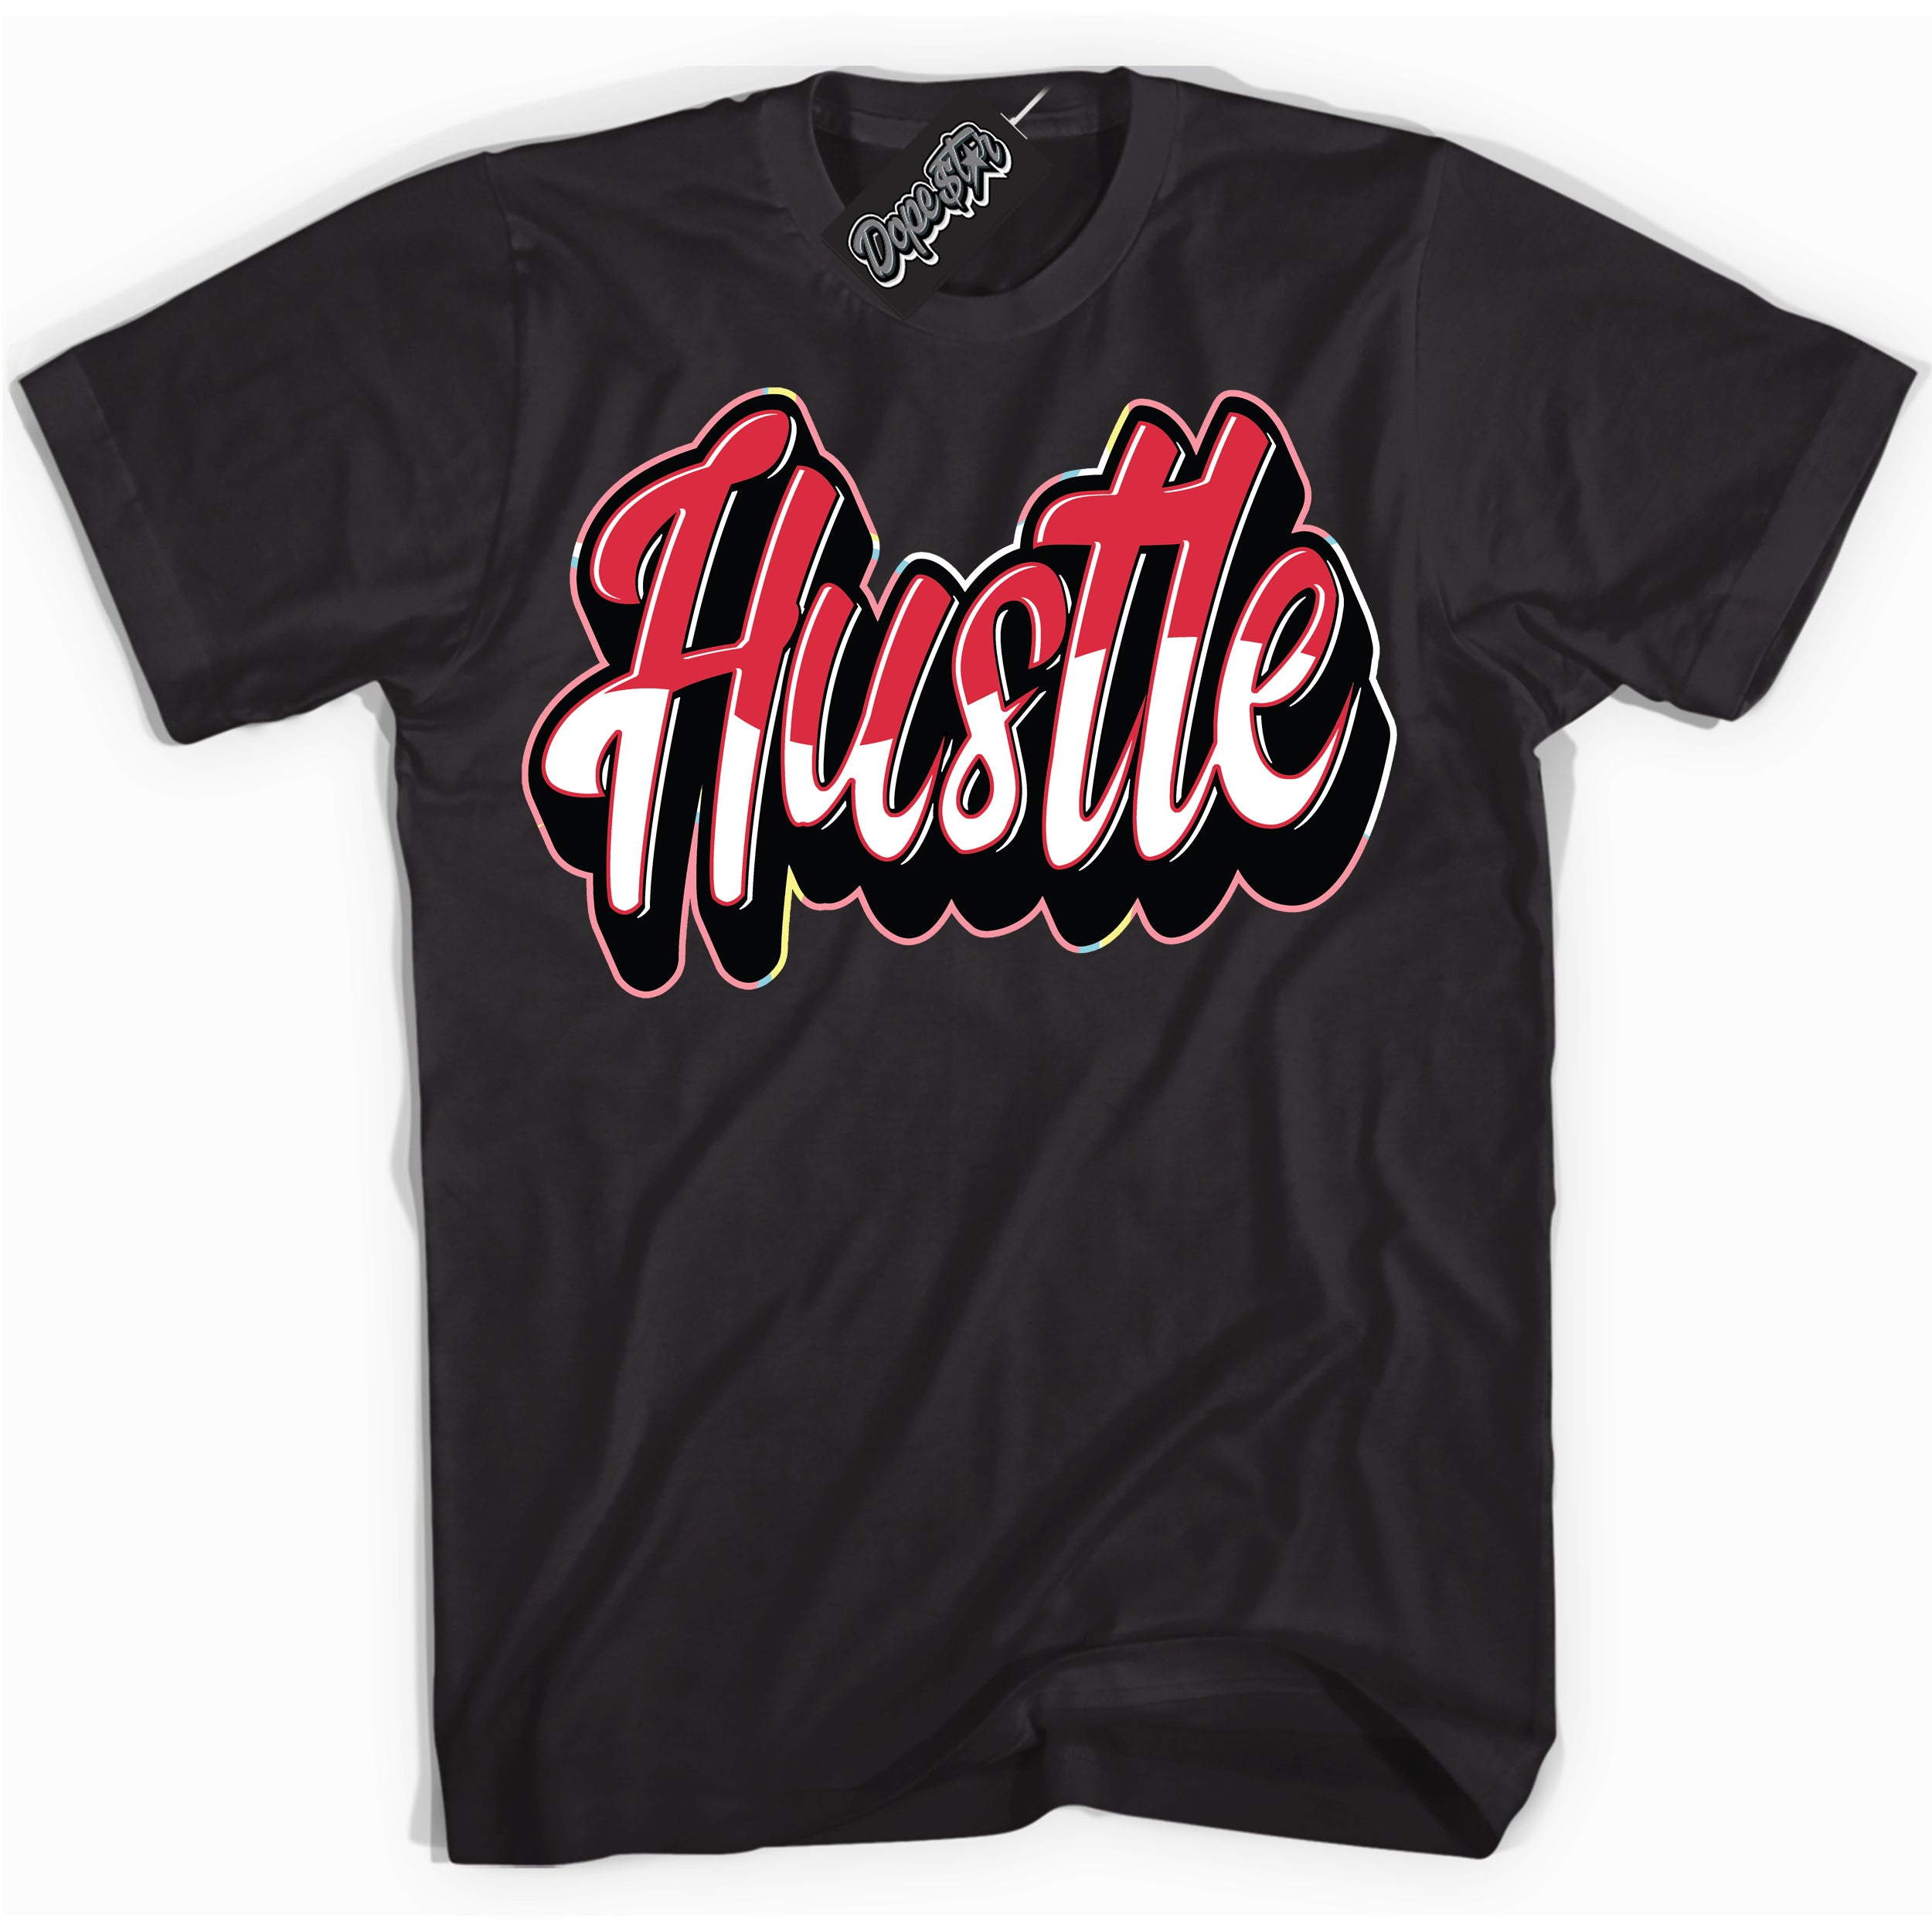 Cool Black graphic tee with “ Hustle ” design, that perfectly matches Spider-Verse 1s sneakers 